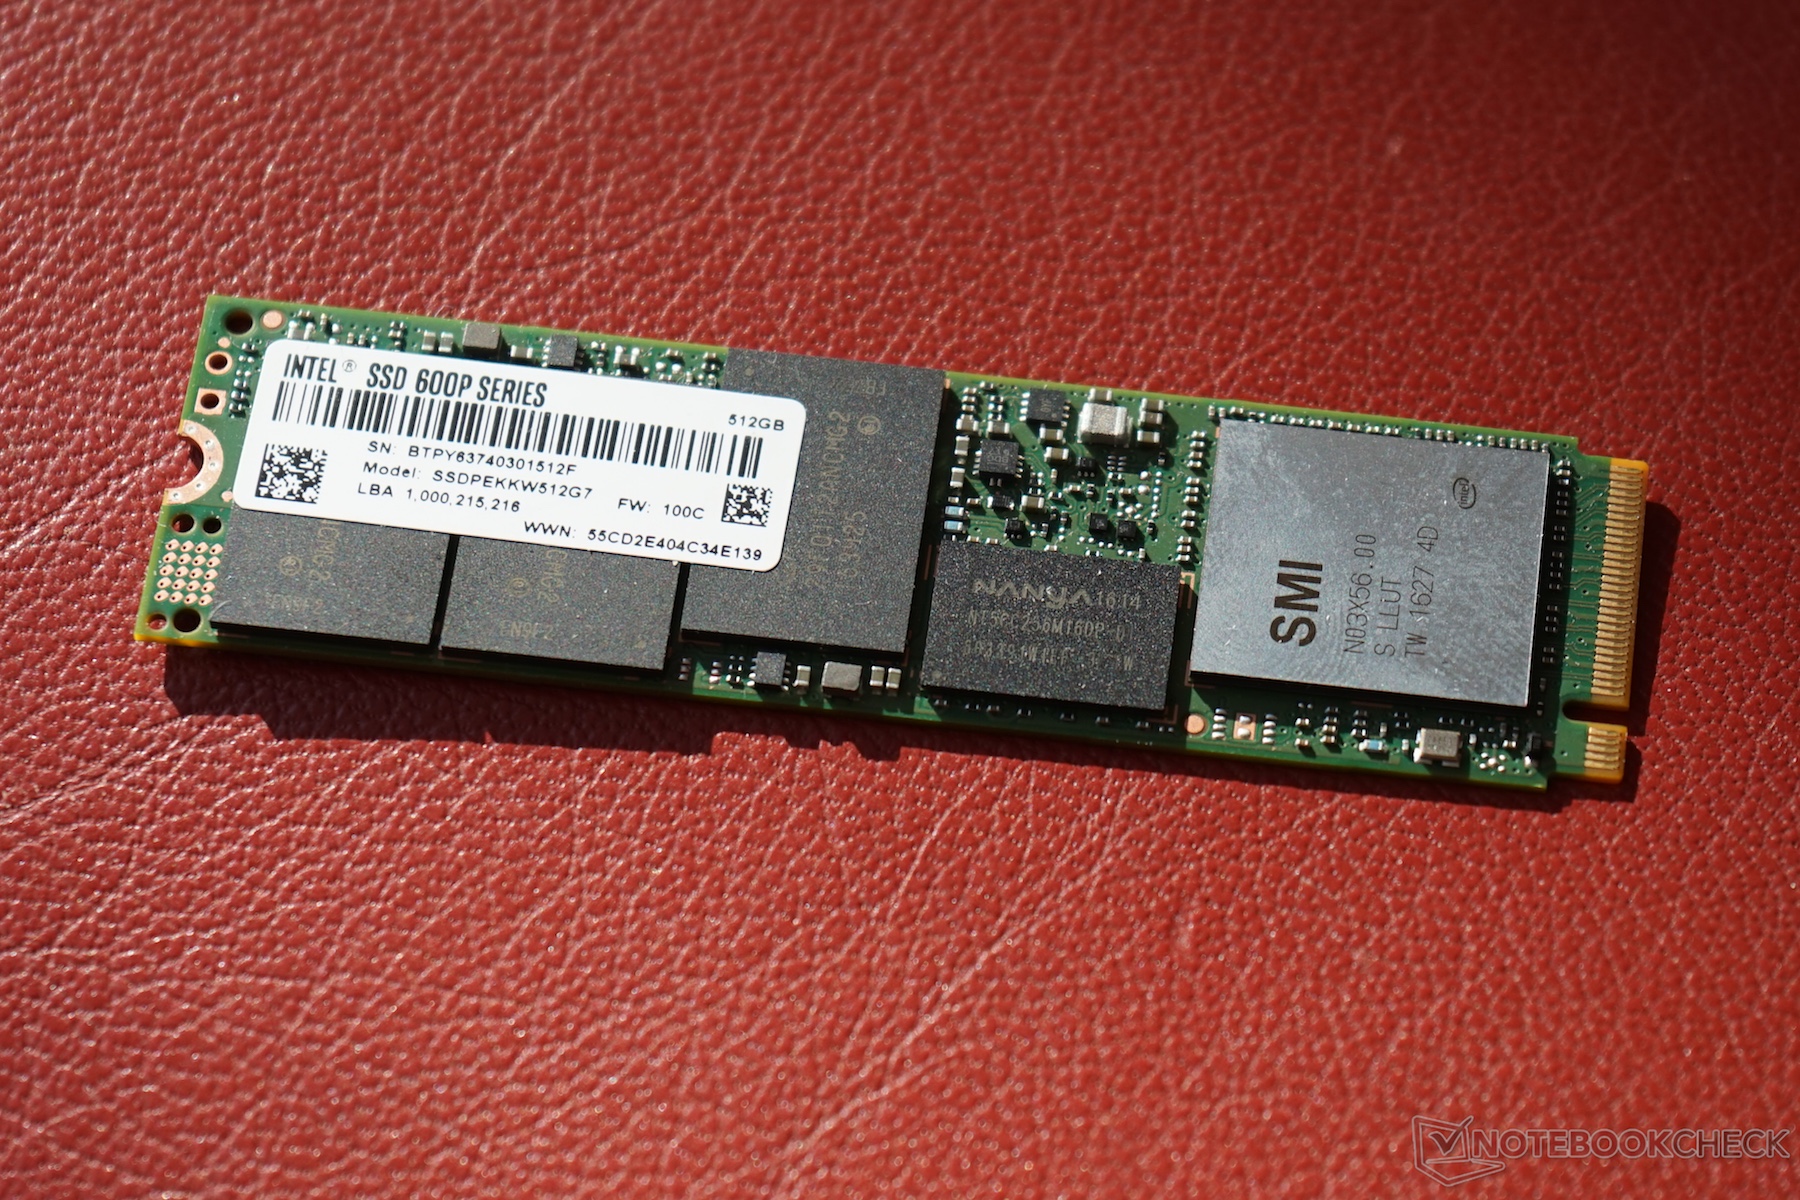 Intel SSD 600p 512 GB Review: The Entry-Level NVMe SSD